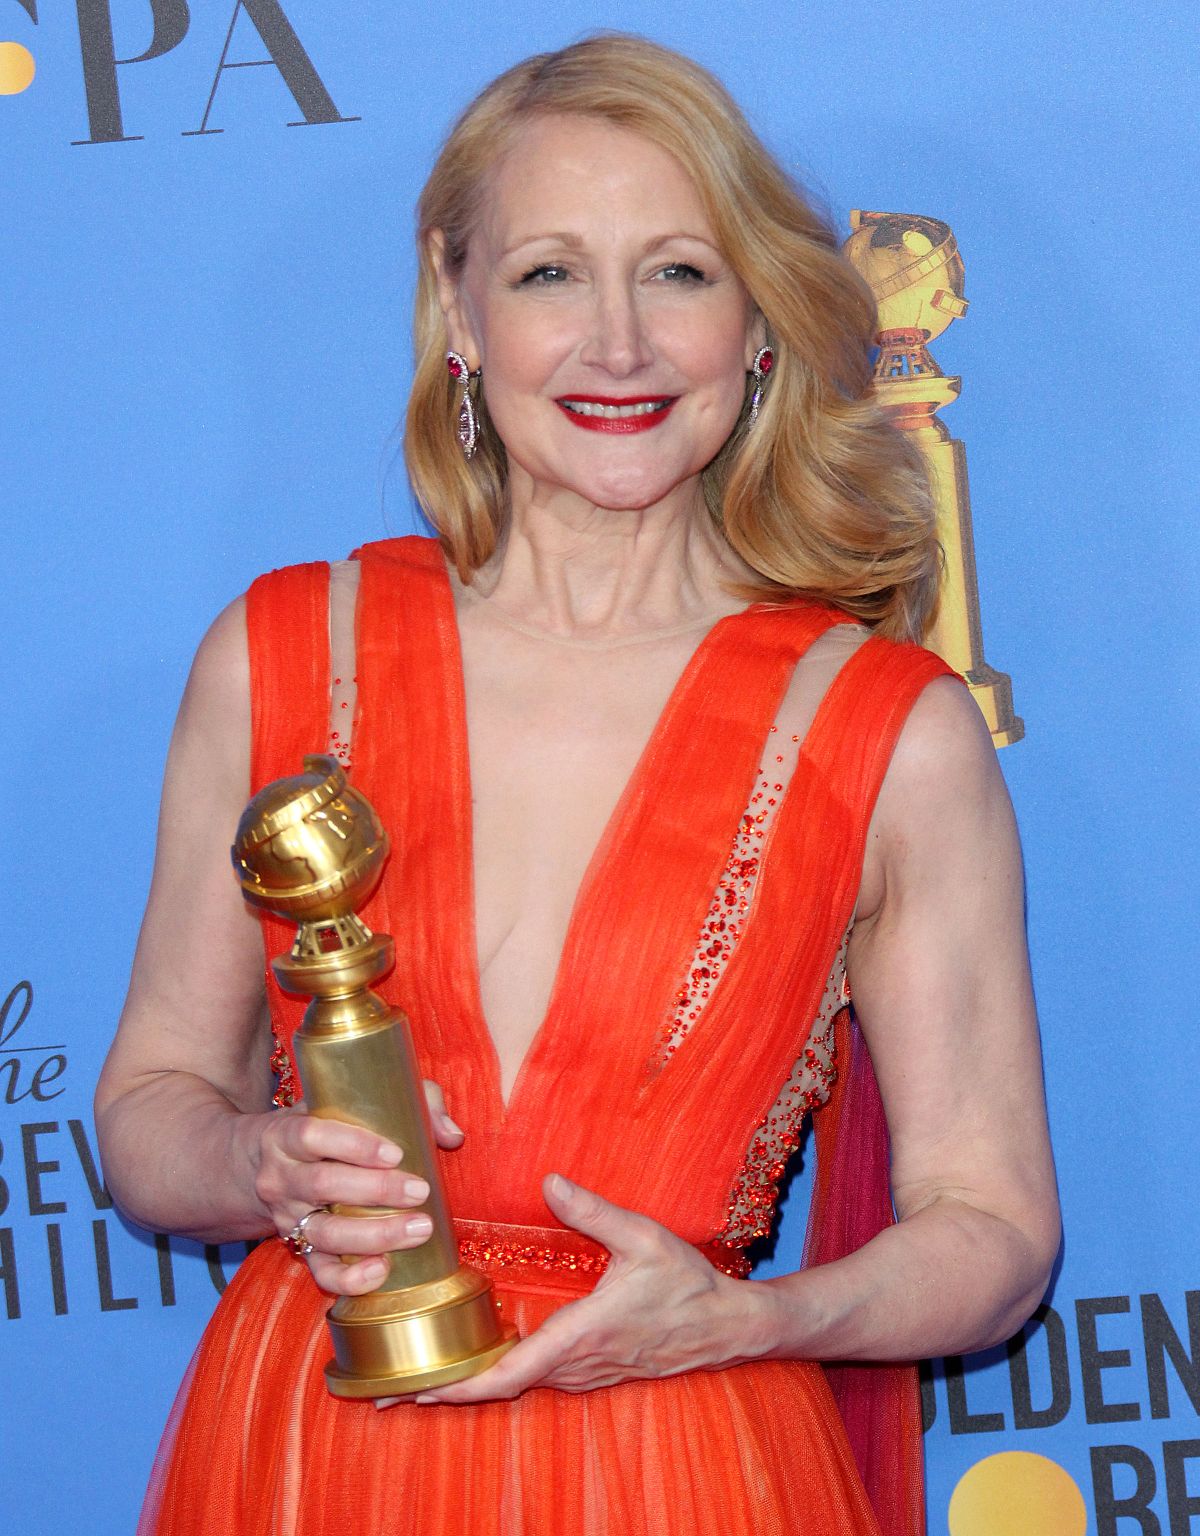 PATRICIA CLARKSON at 2019 Golden Globe Awards in Beverly Hills 01/06/2019.